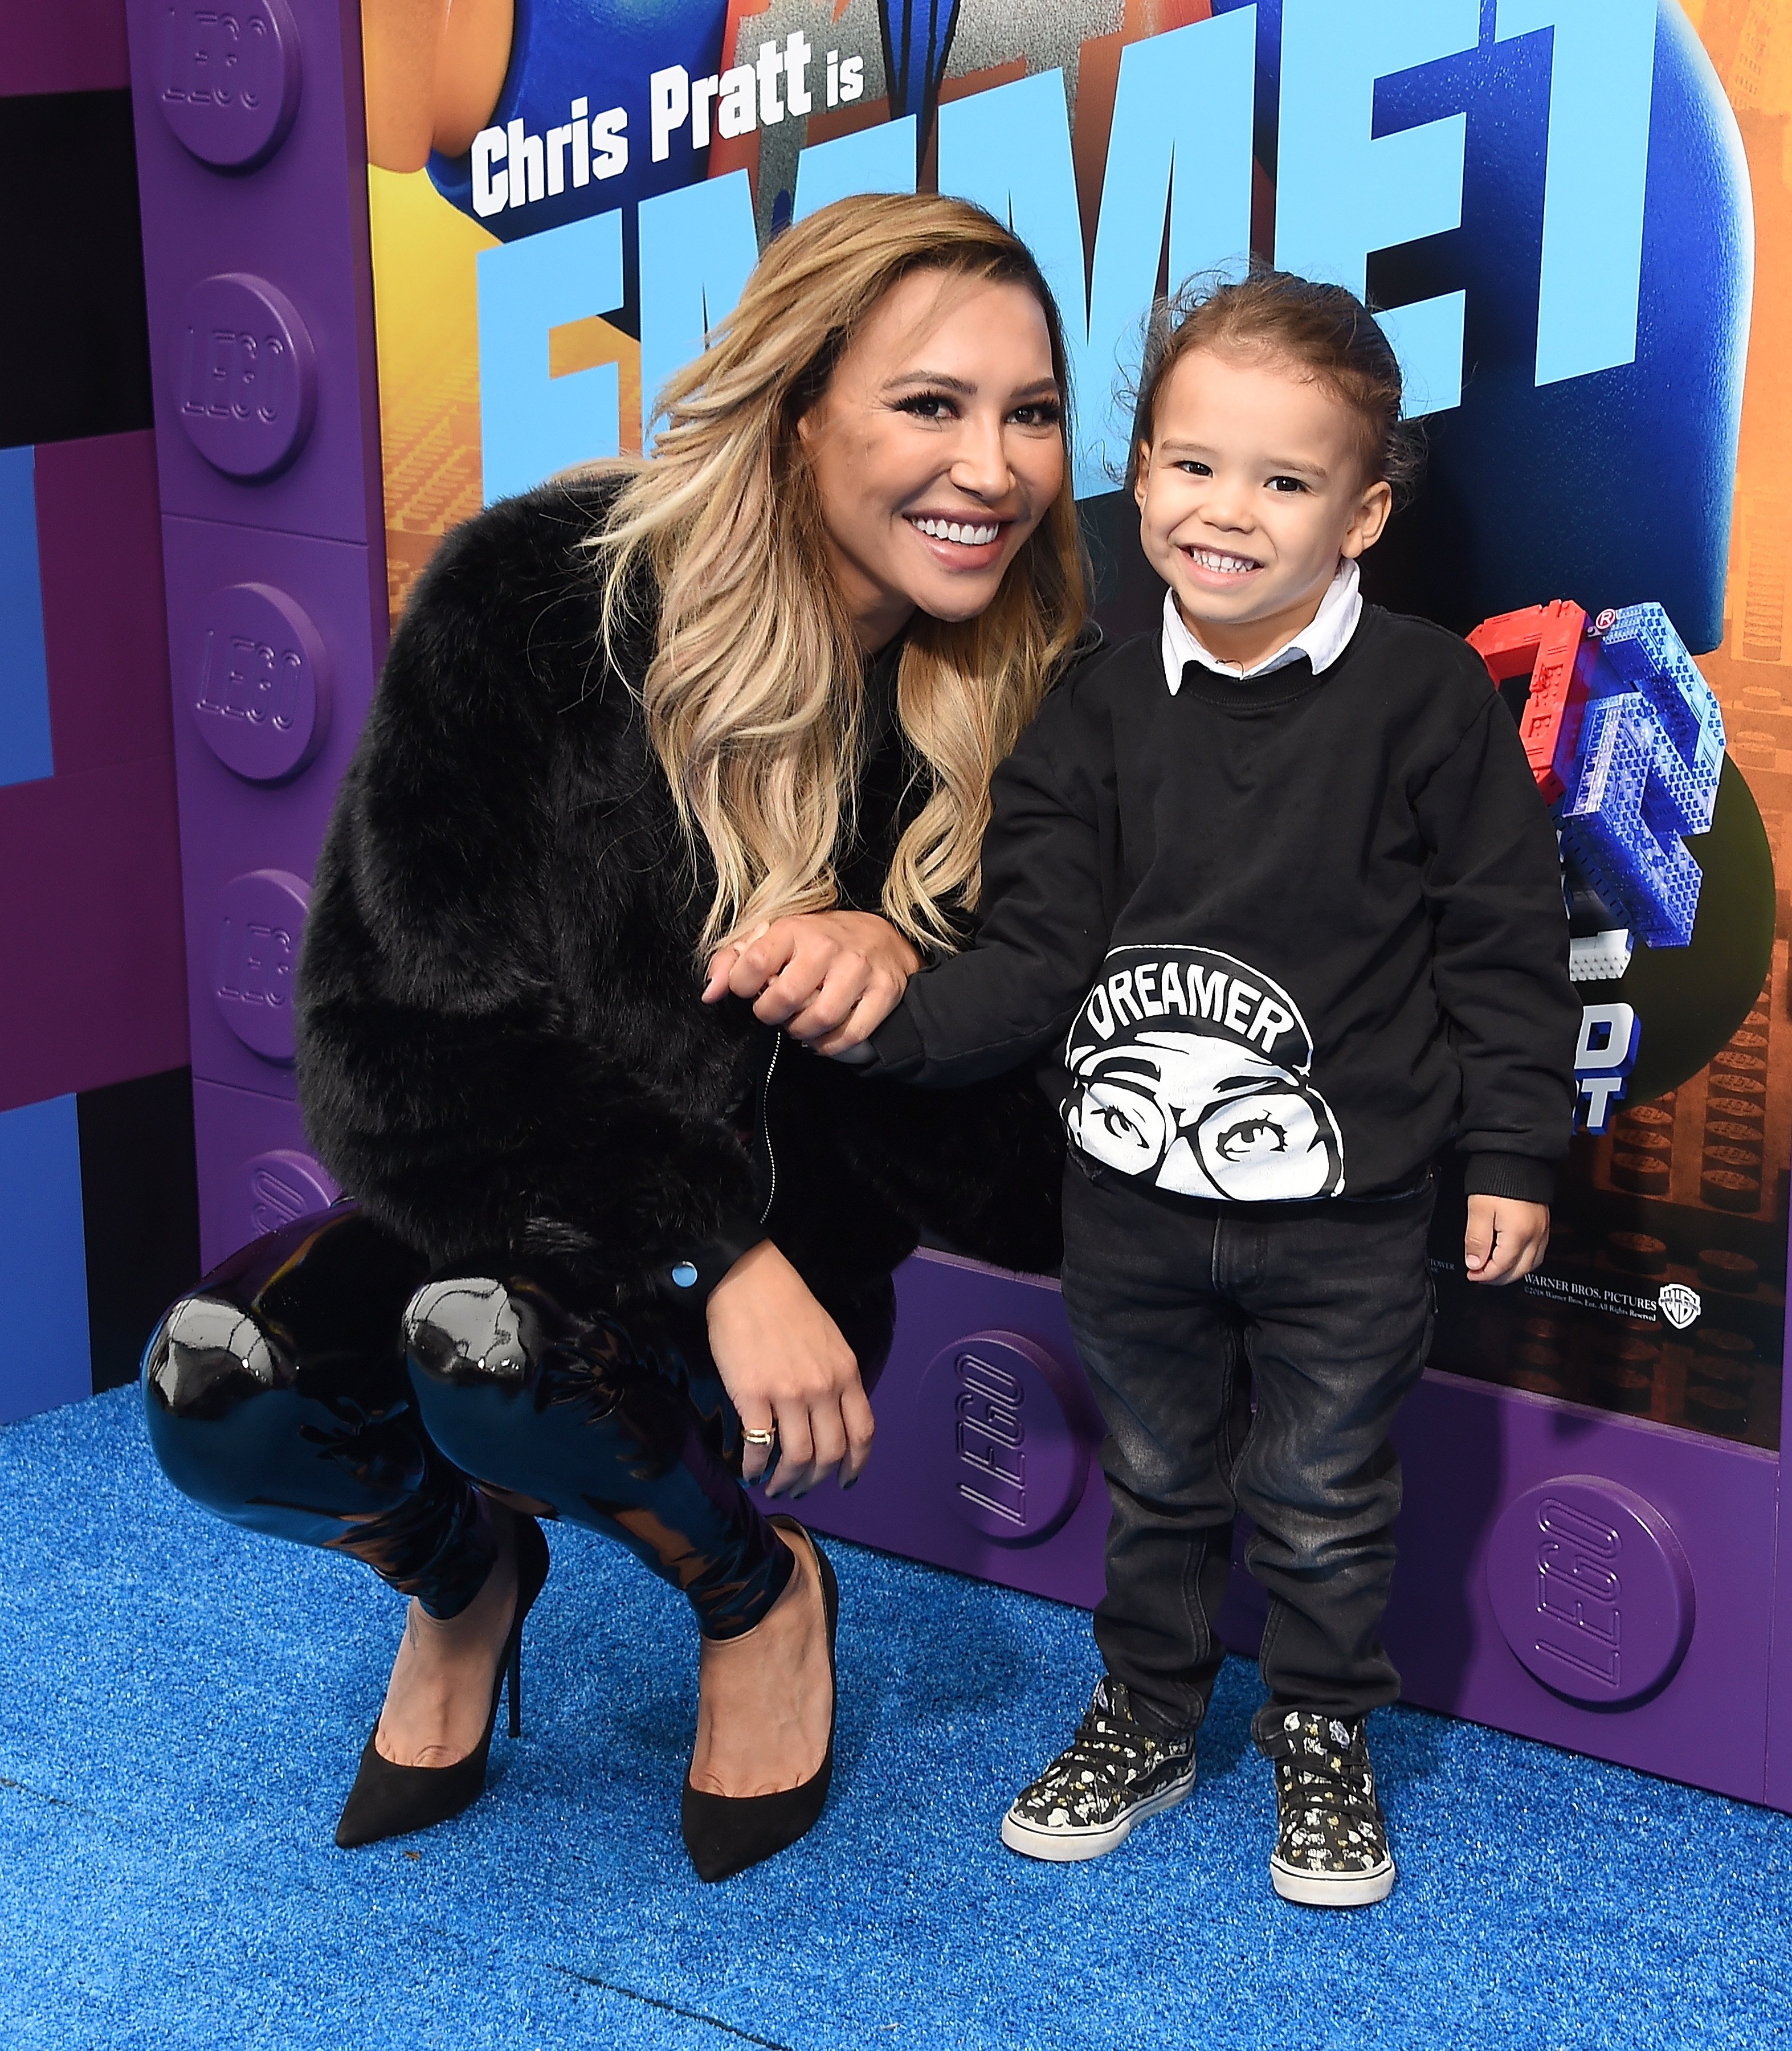 Naya Rivera and Josey Hollis attend the premiere of Warner Bros. Pictures' "The Lego Movie 2: The Second Part" on February 2, 201,9 in Westwood, California. | Source: Getty Images.